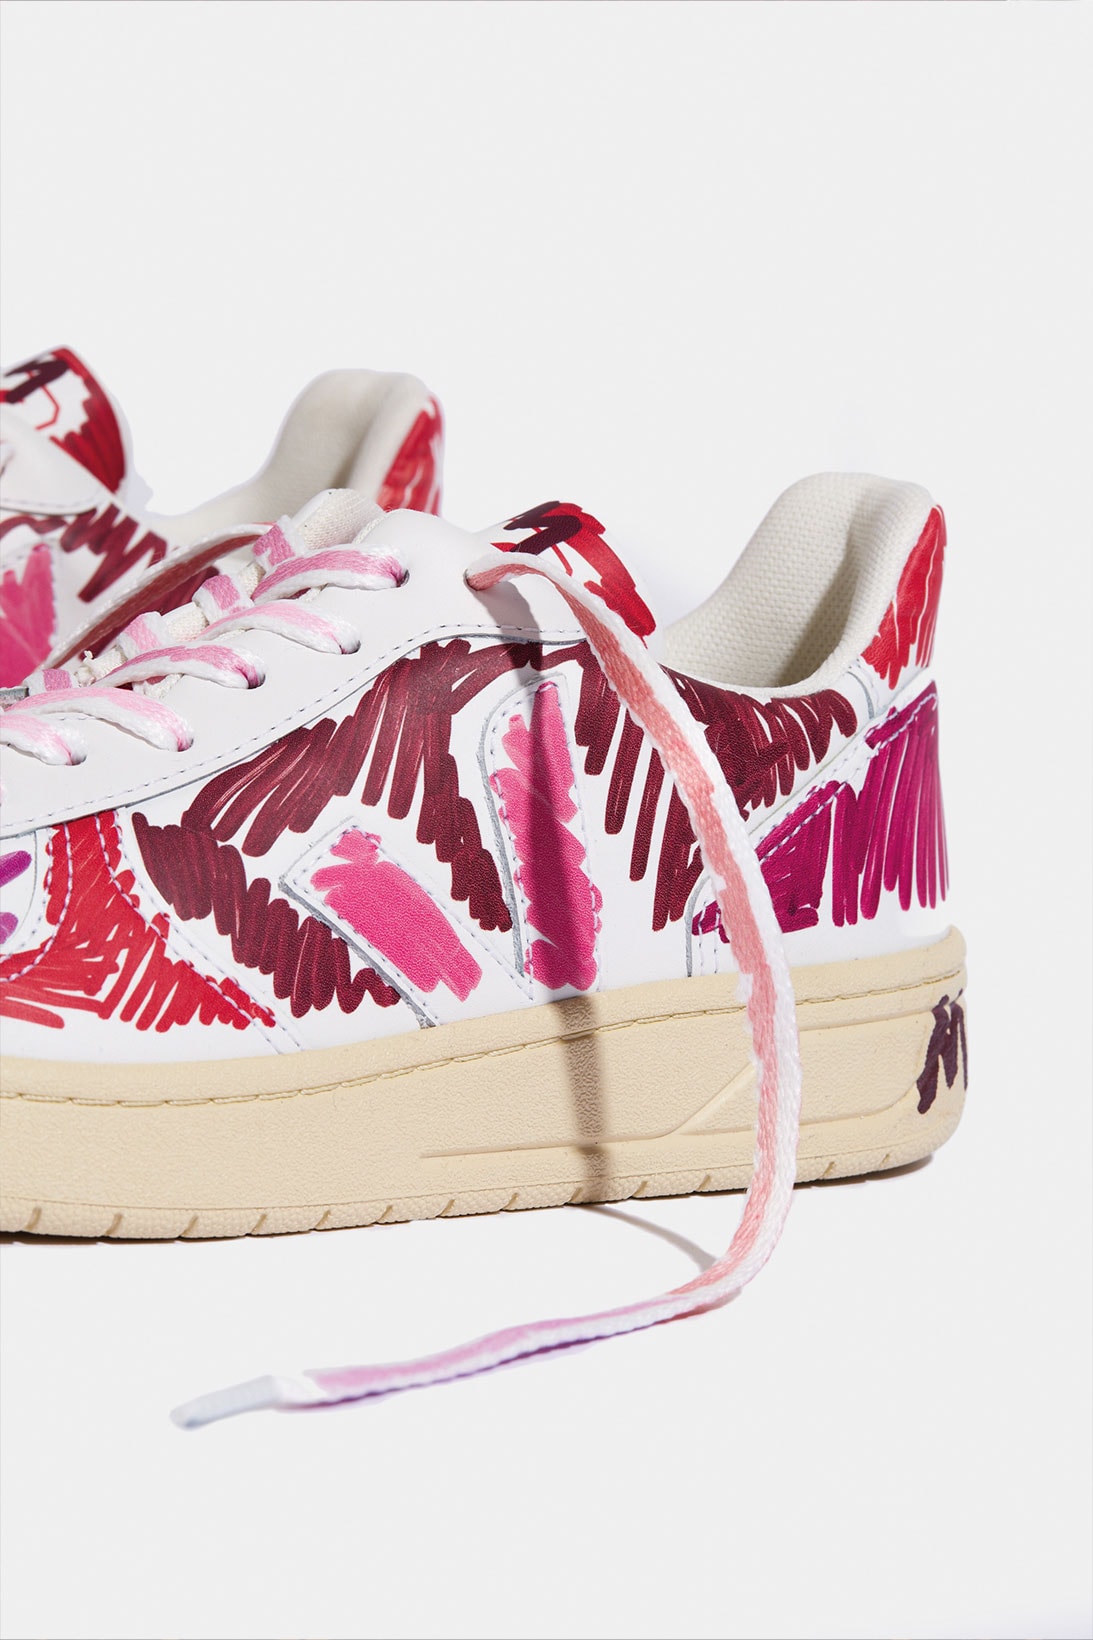 Marni Veja V-10 15 Sustainable Sneakers Collaboration Release Info